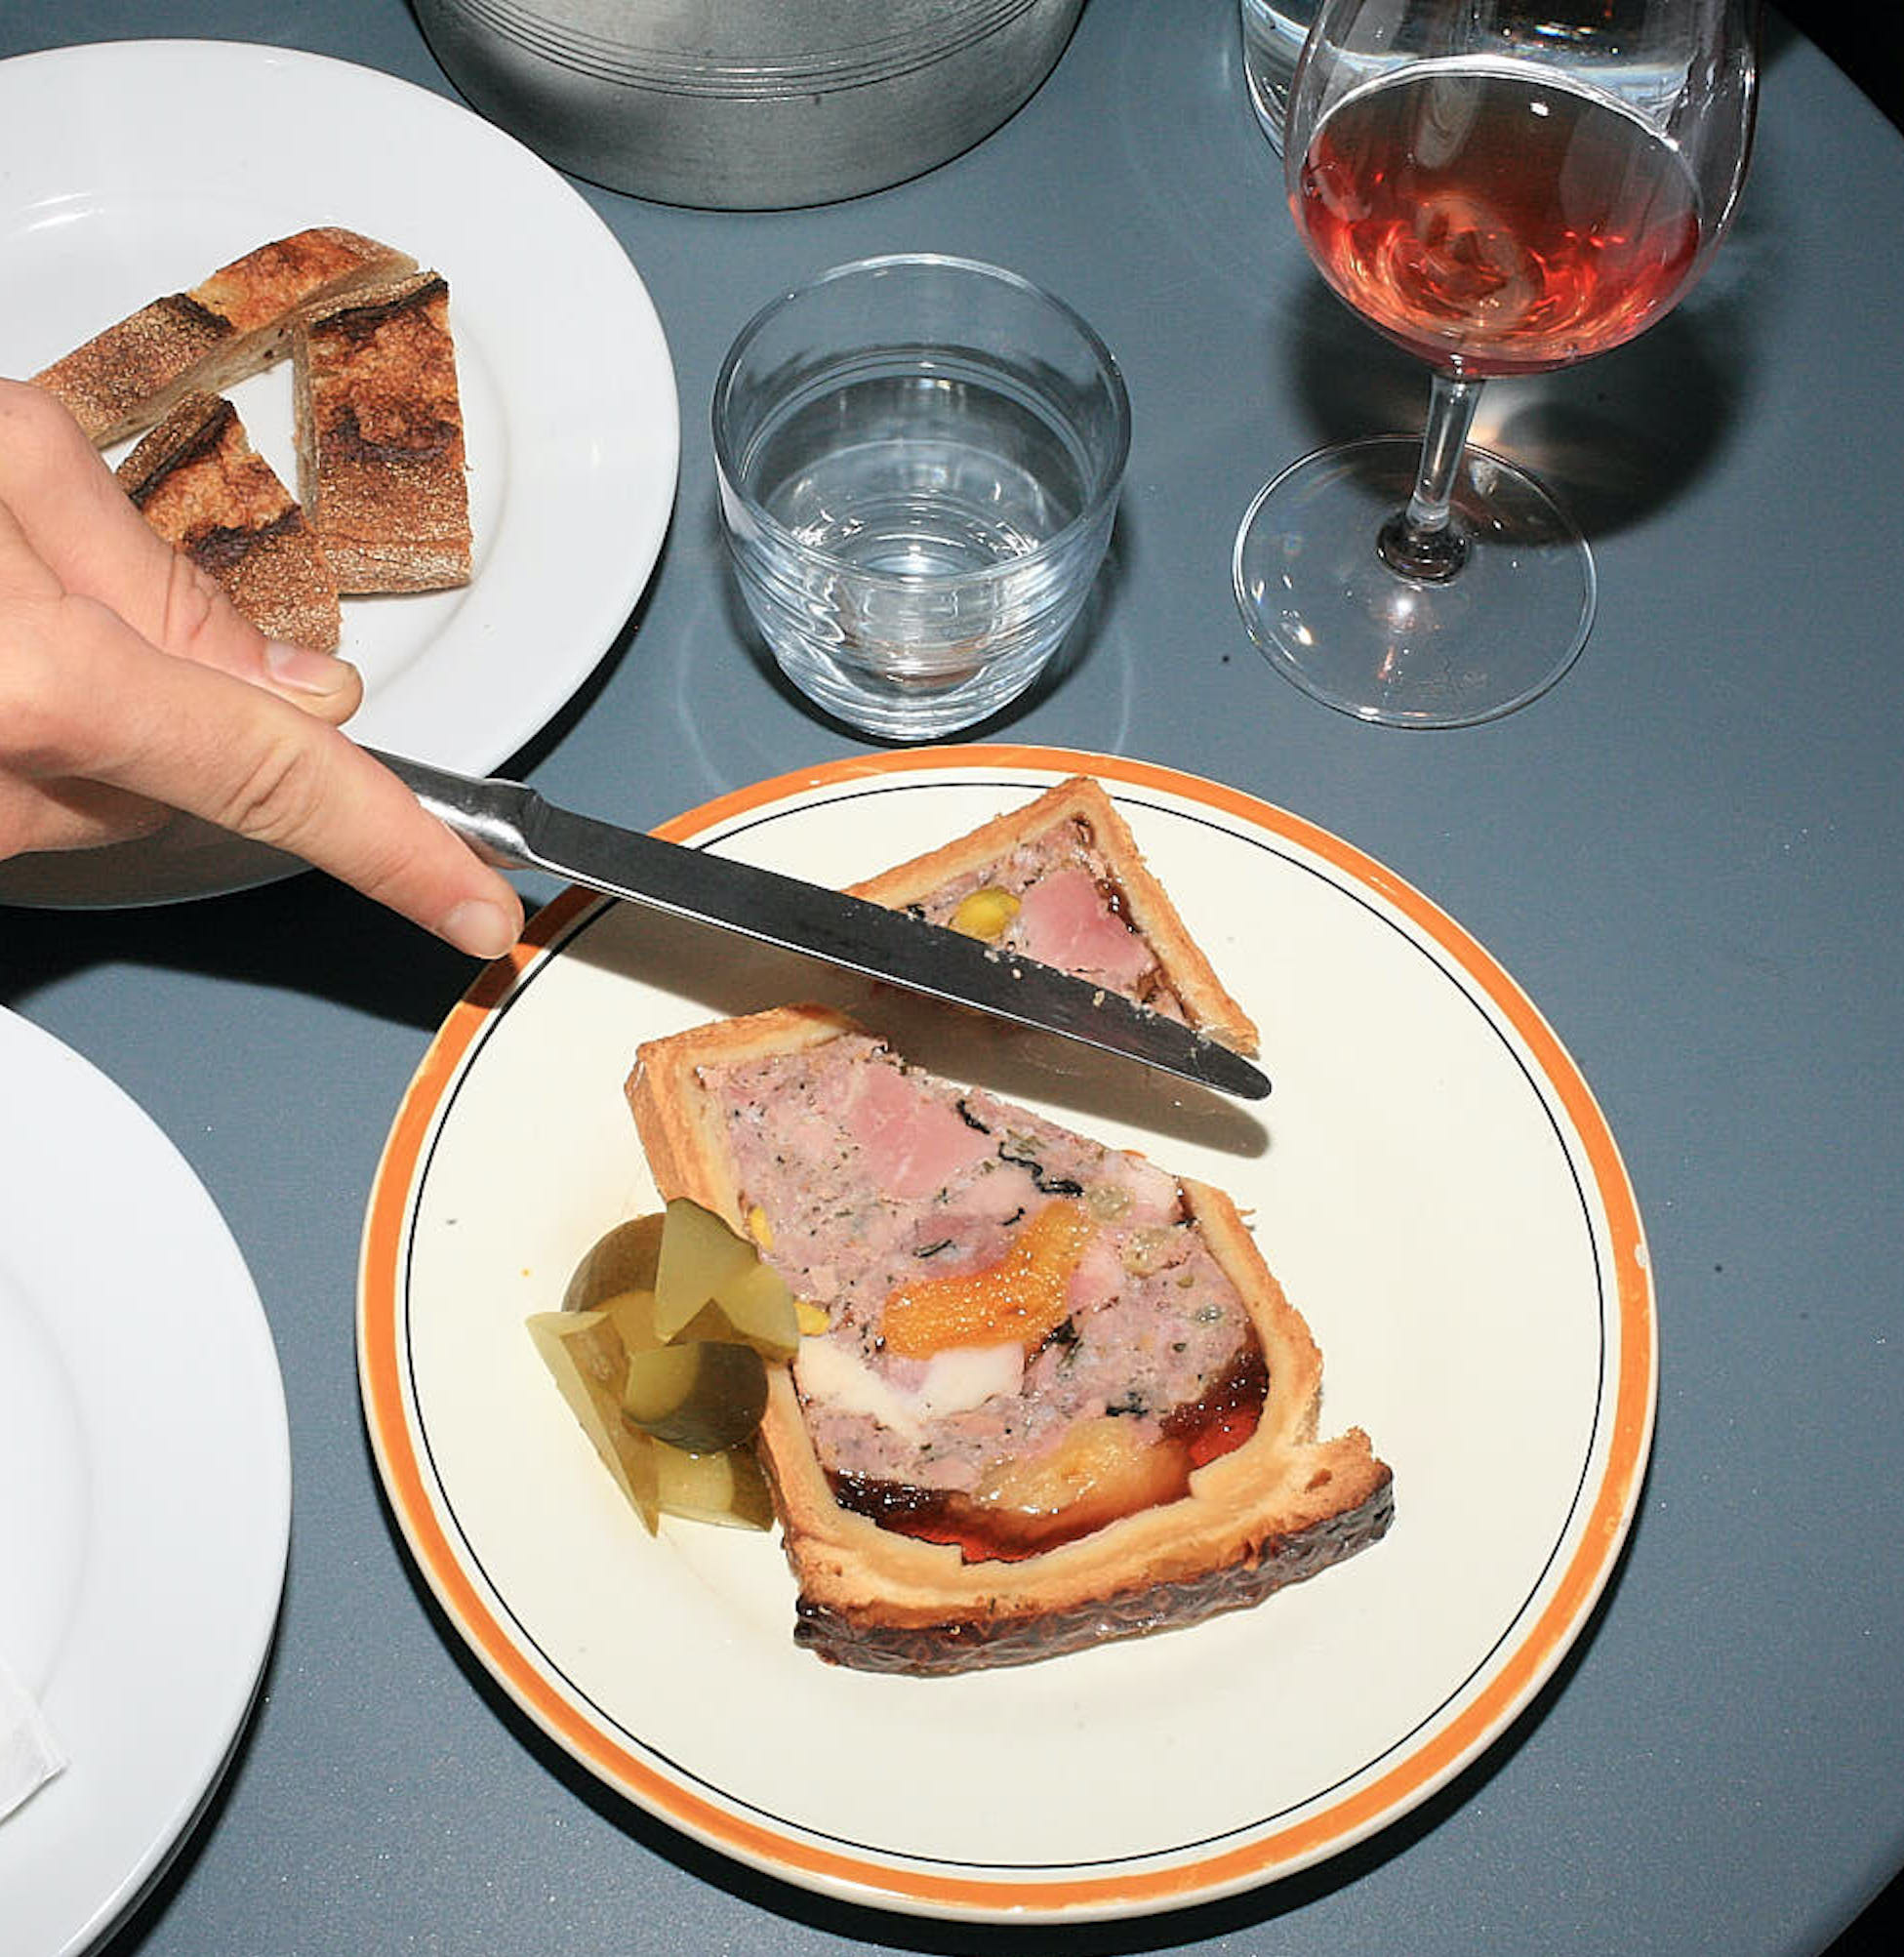 A hand cuts into a slice of patê en croute on a blue outdoor table, the kind seen at brasseries. A glass of pink wine and a plate of cut baguette sit alongside.